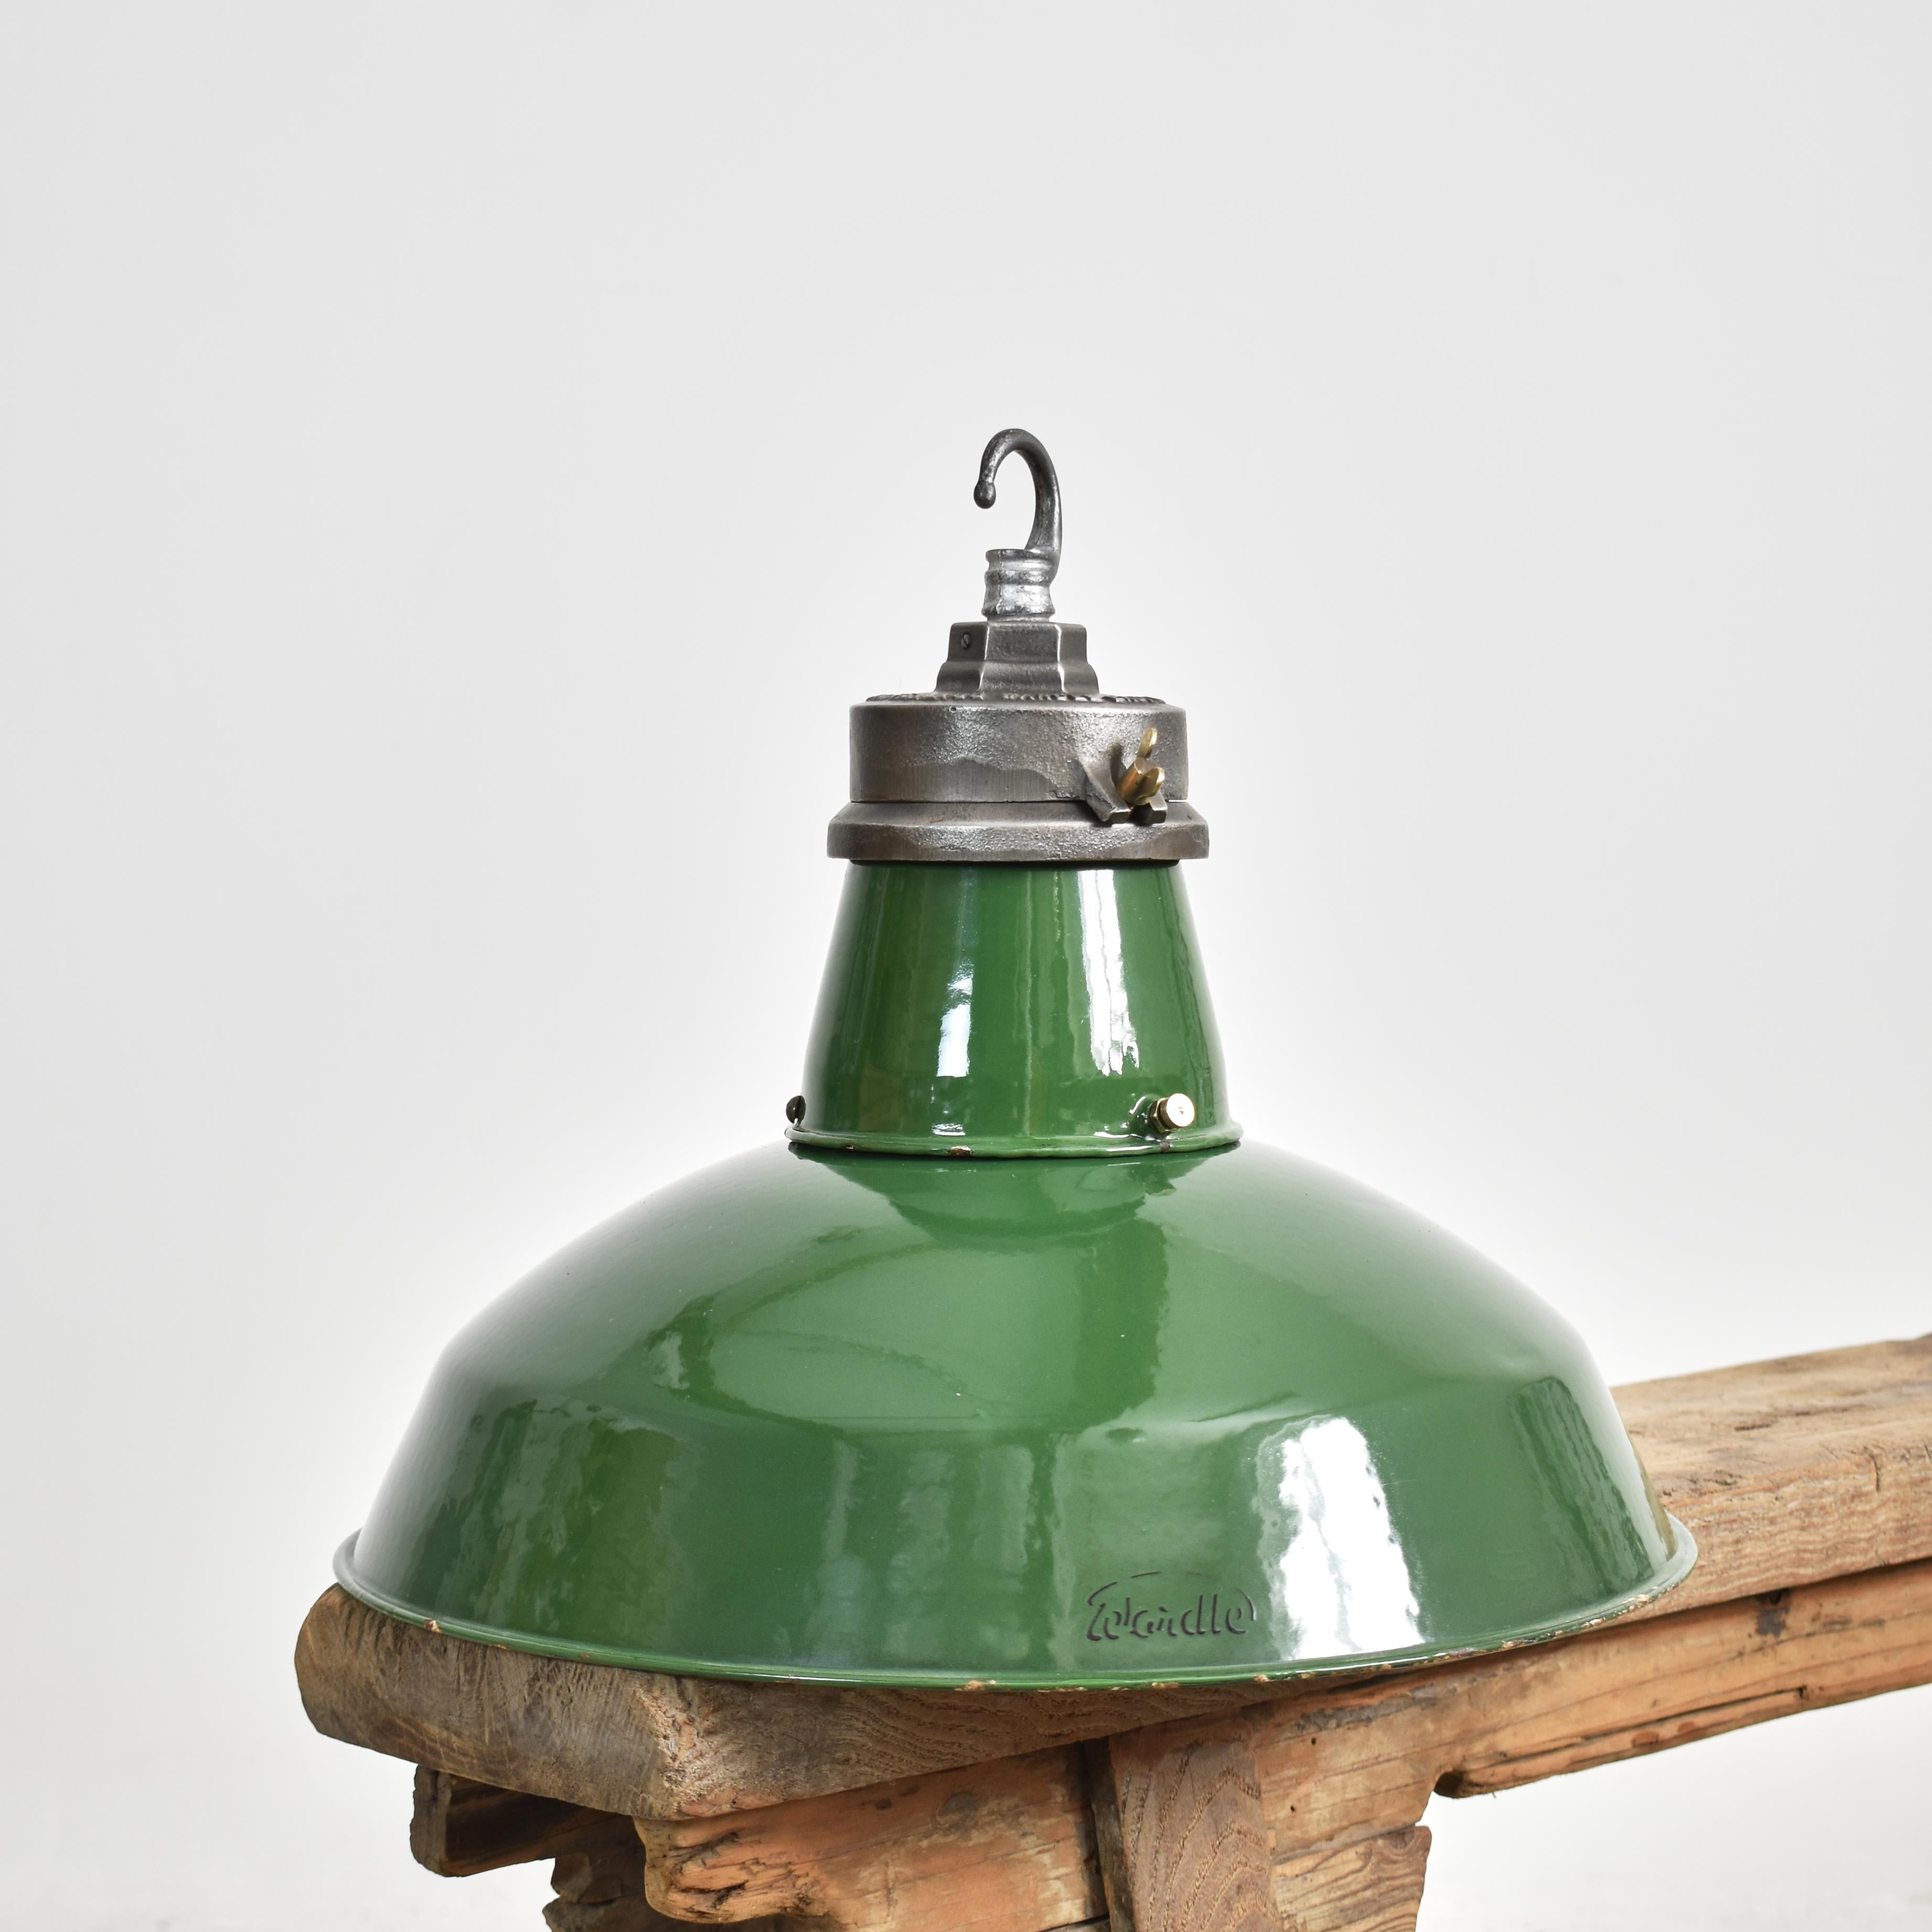 Industrial Enamel Pendant Light By Wardle

Stunning original enamel factory light by Wardle. They look fantastic in a row above a kitchen island or hanging in cafe/restaurants or retail spaces.

The Wardle Engineering Company Ltd was founded in